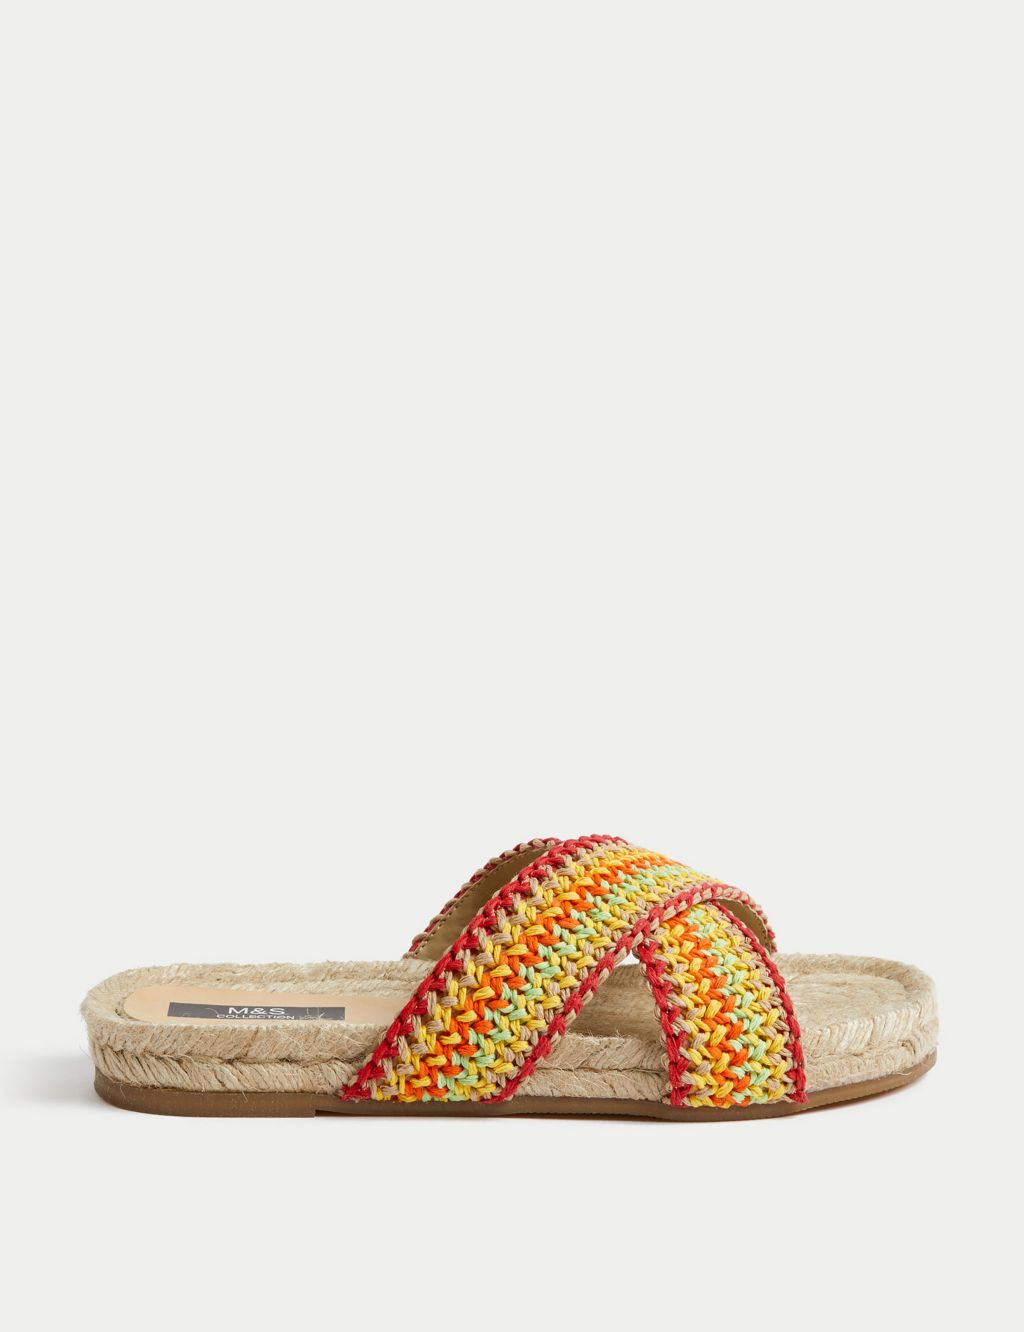 Woven Crossover Flat Espadrilles image 1